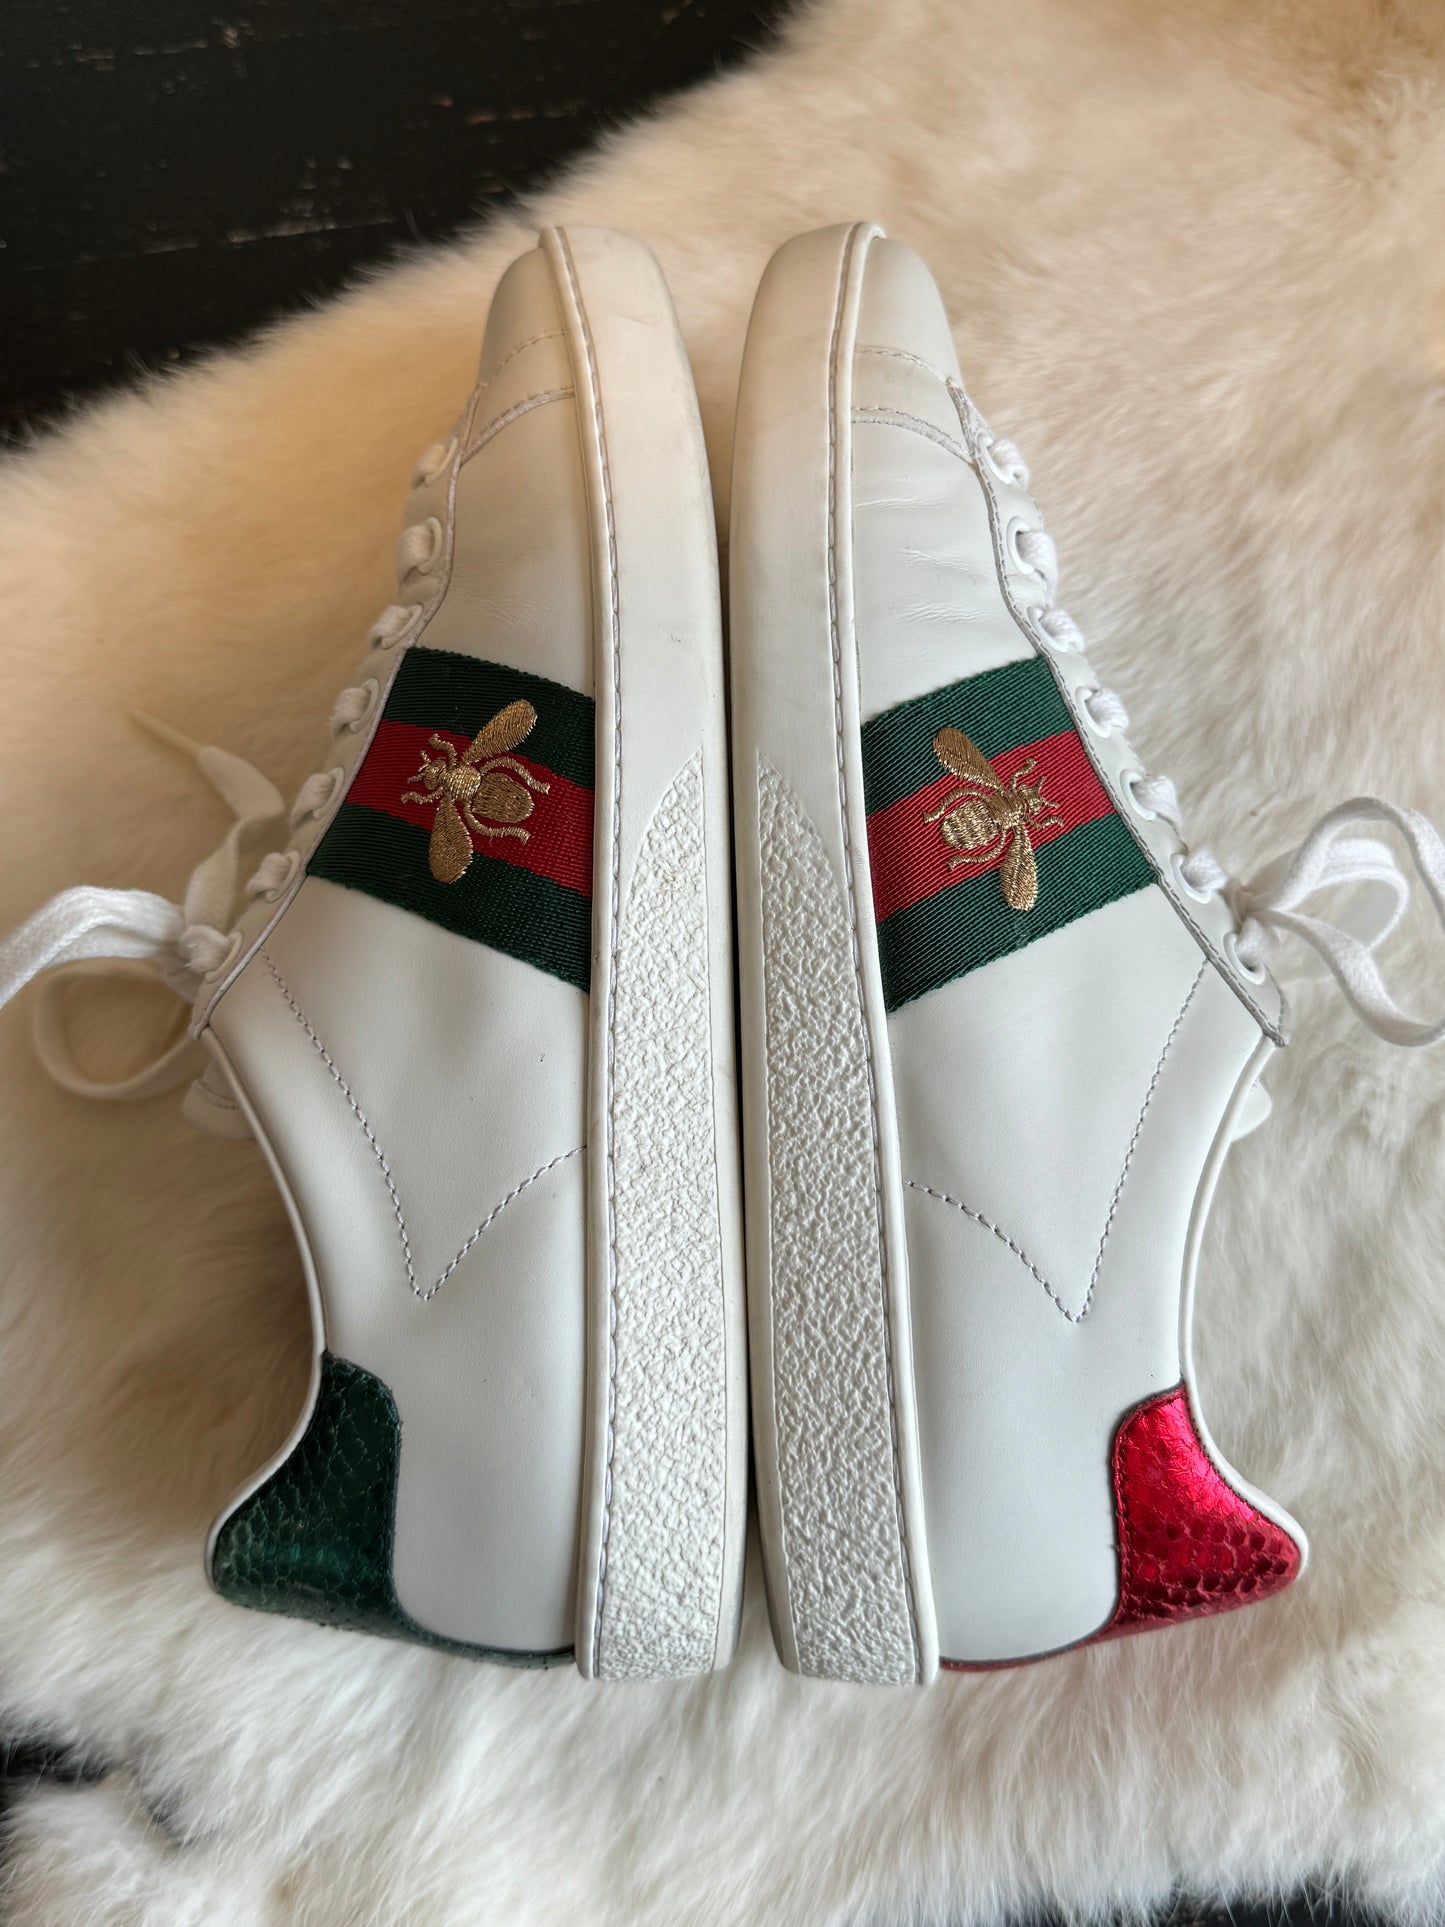 Gucci Ace Bees Sneakers Size 35EU